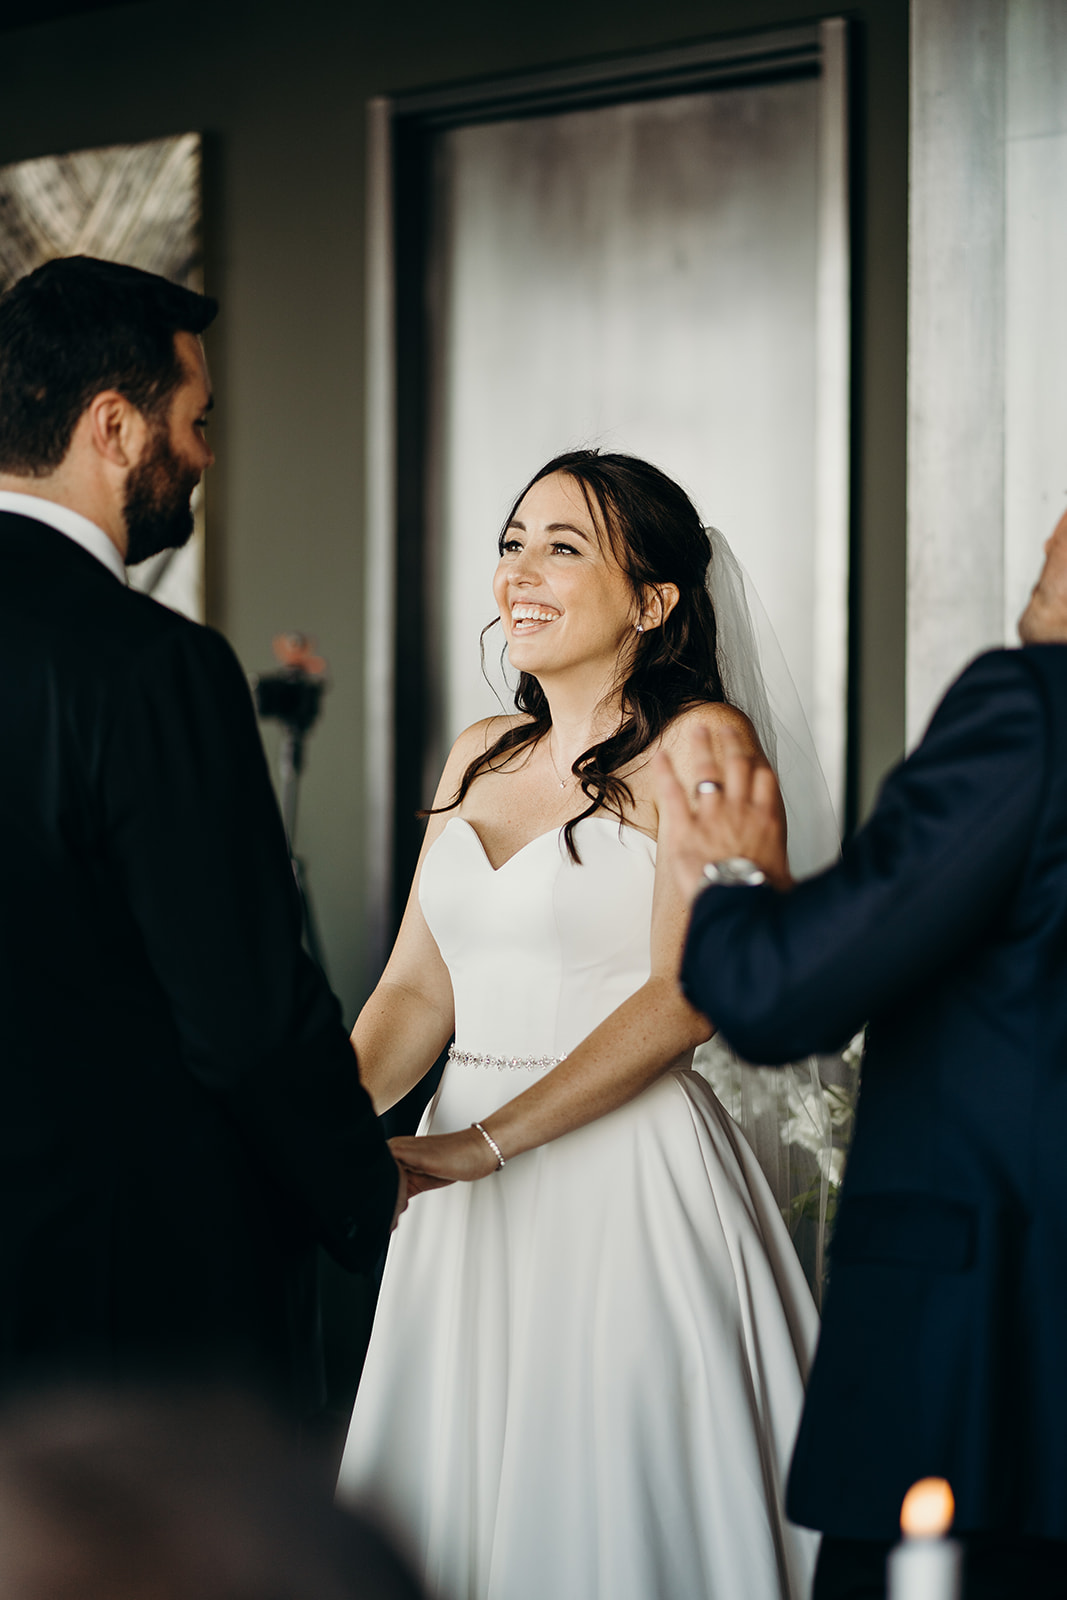 Woman holding hands with man smiling getting married.